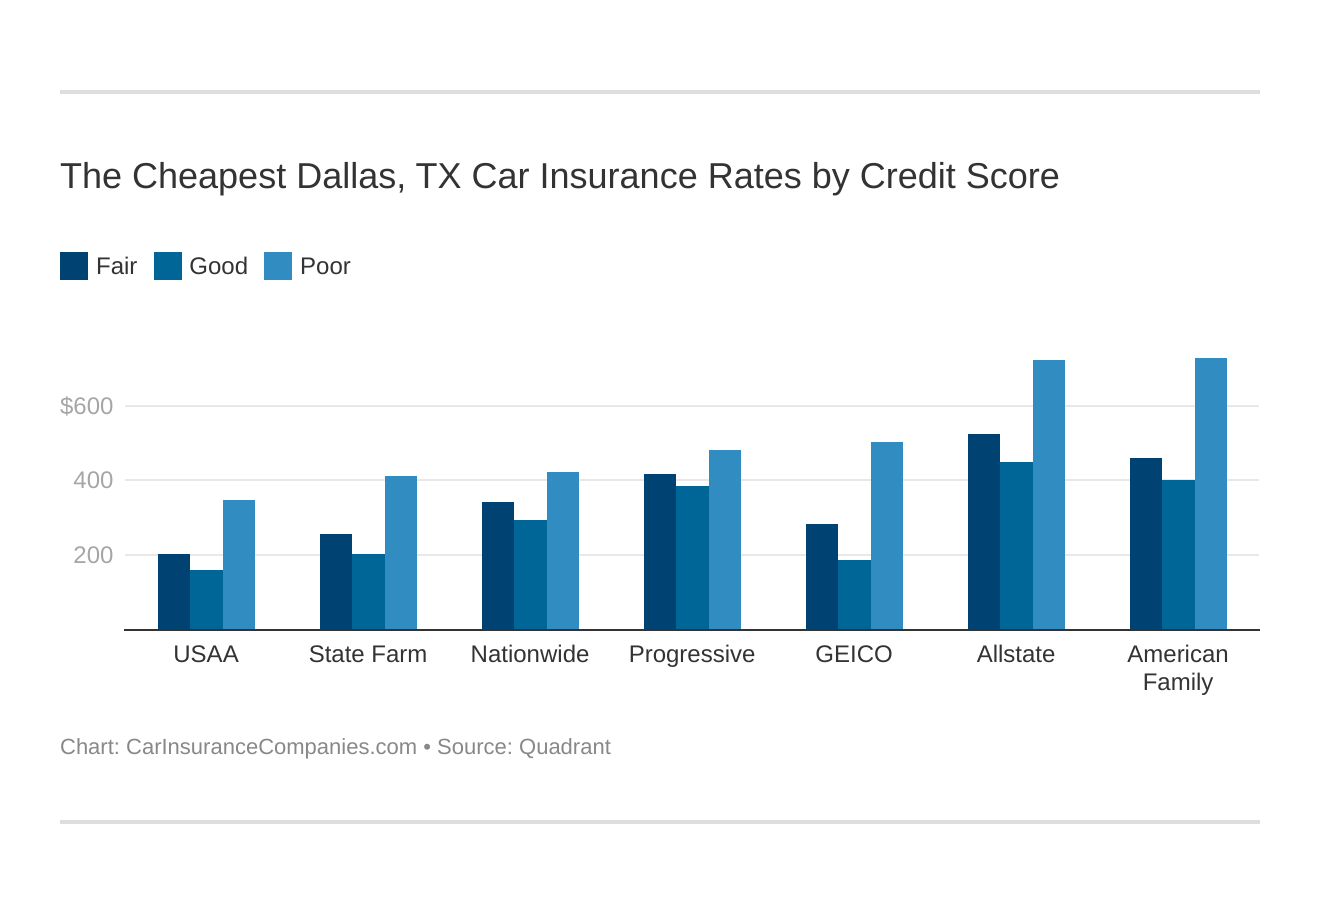 The Cheapest Dallas, TX Car Insurance Rates by Credit Score